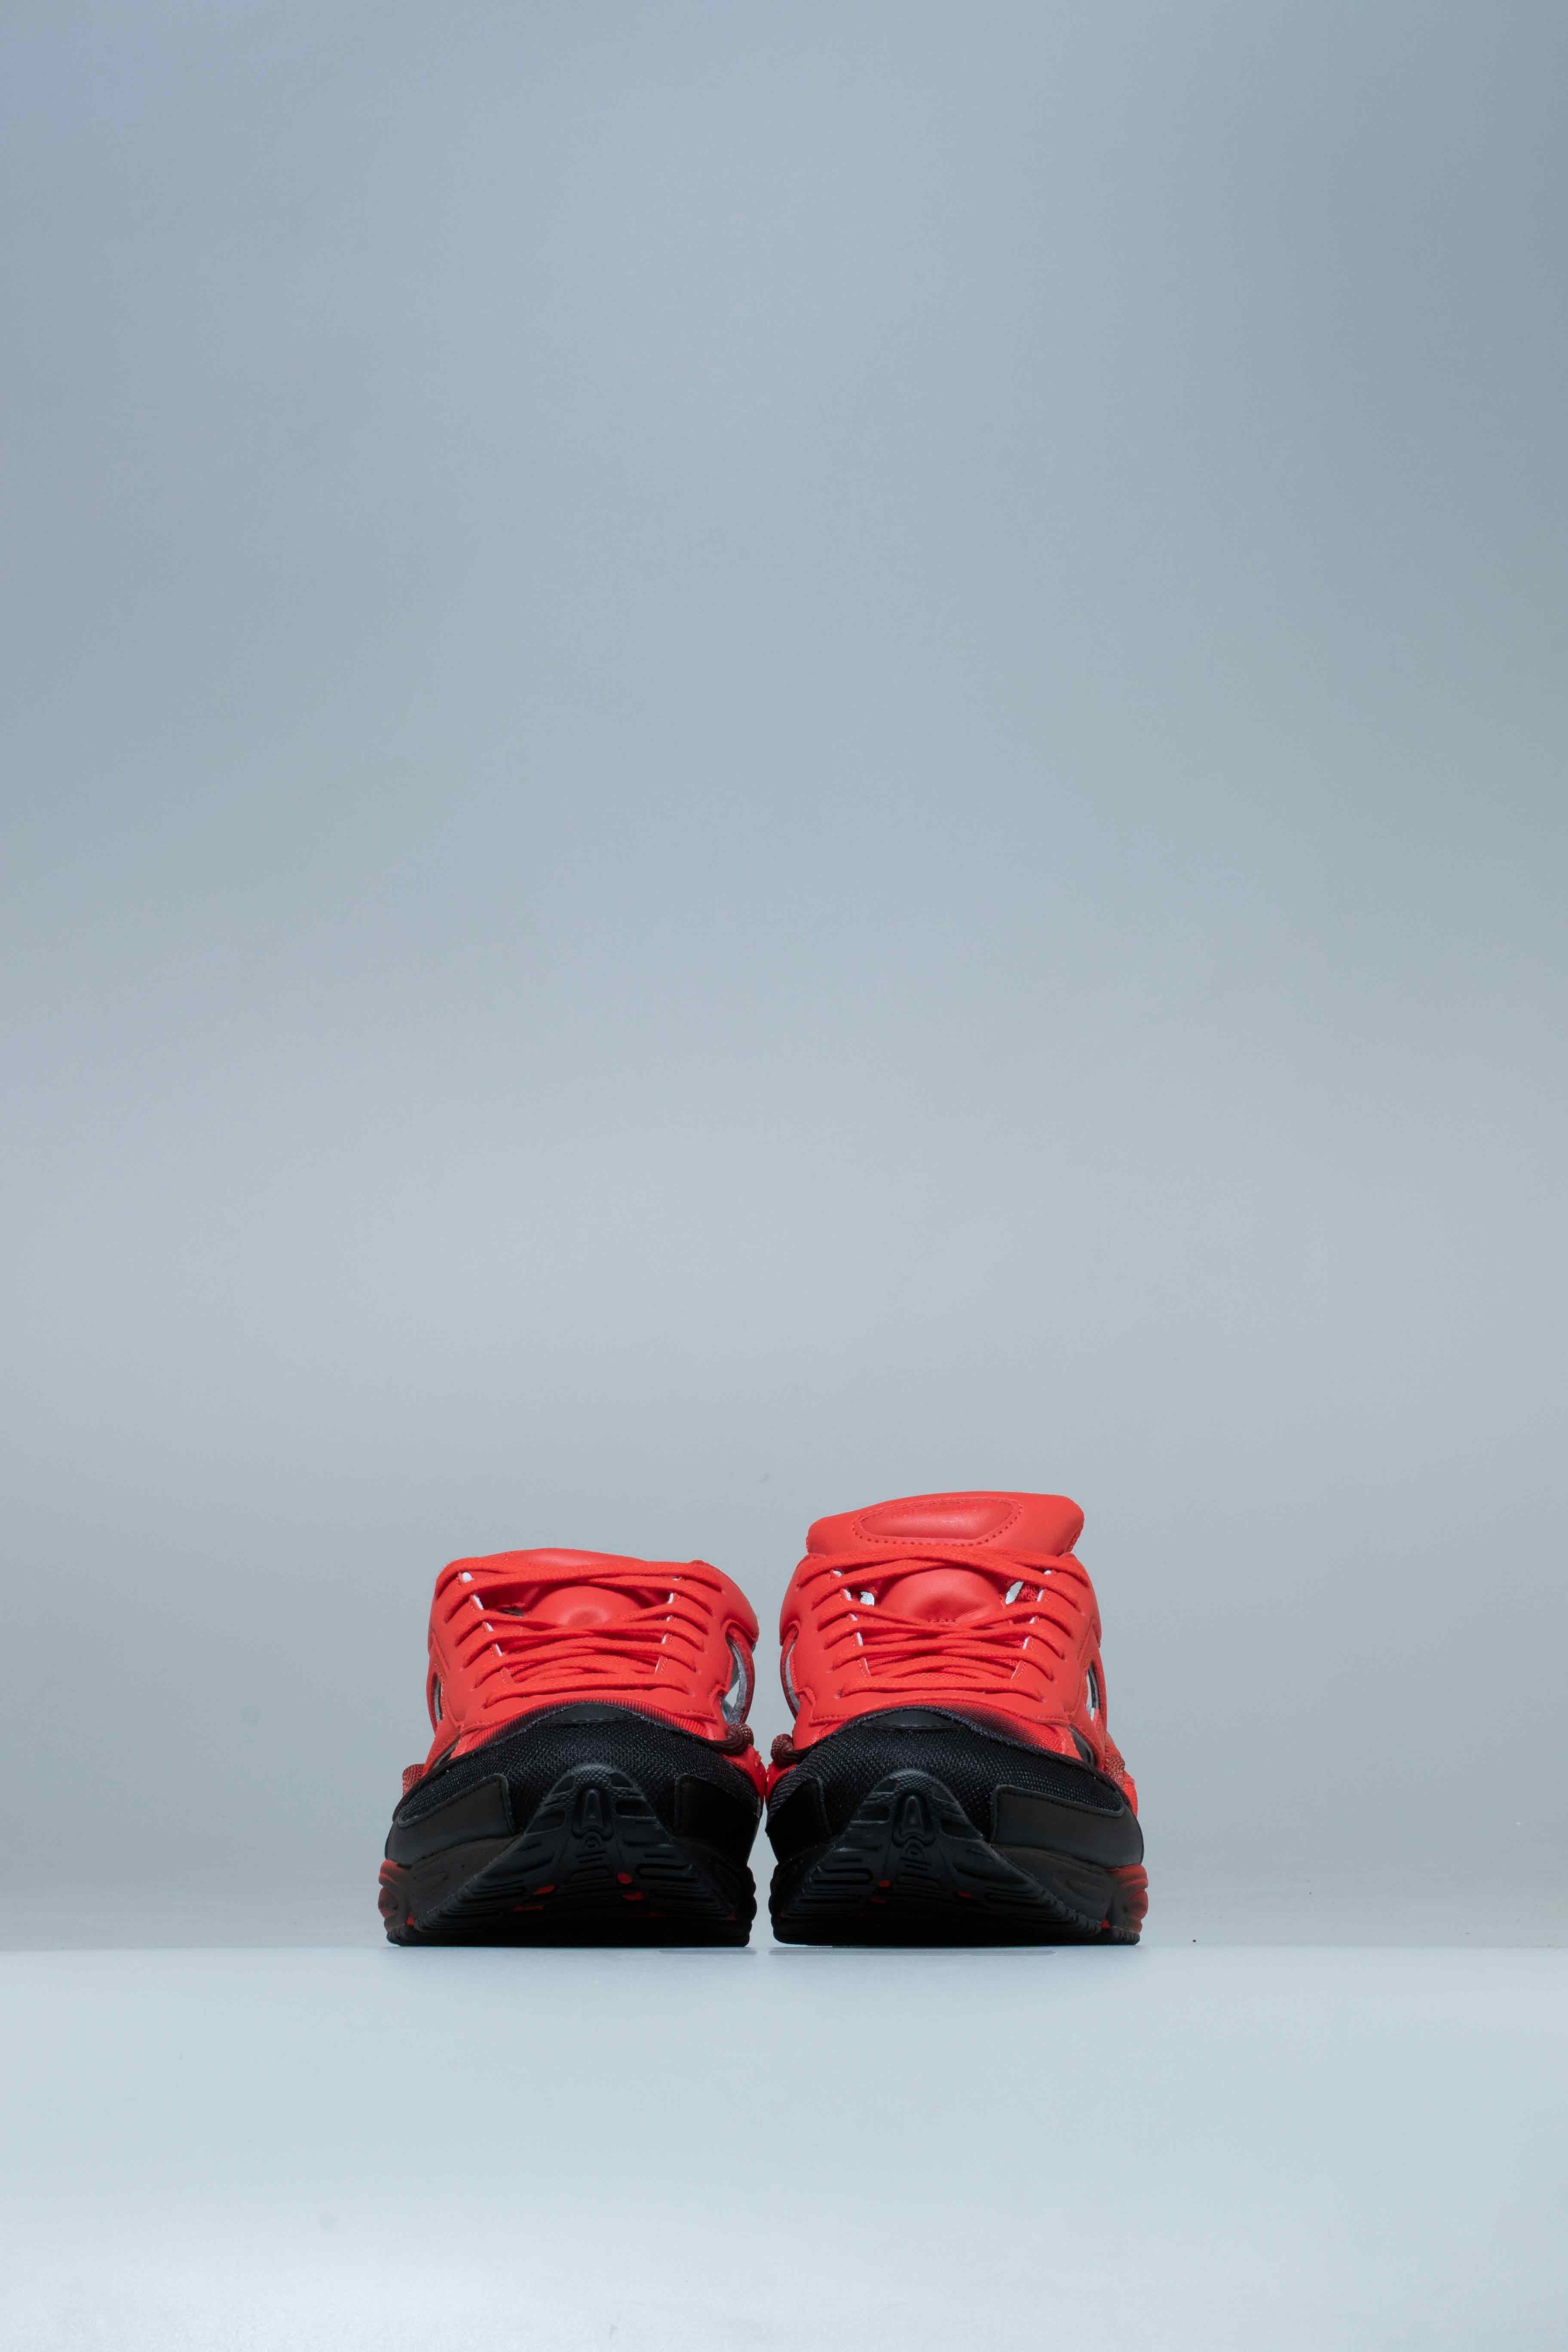 adidas EE7933 Raf Simons Ozweego Replicant Mens Shoes Red –